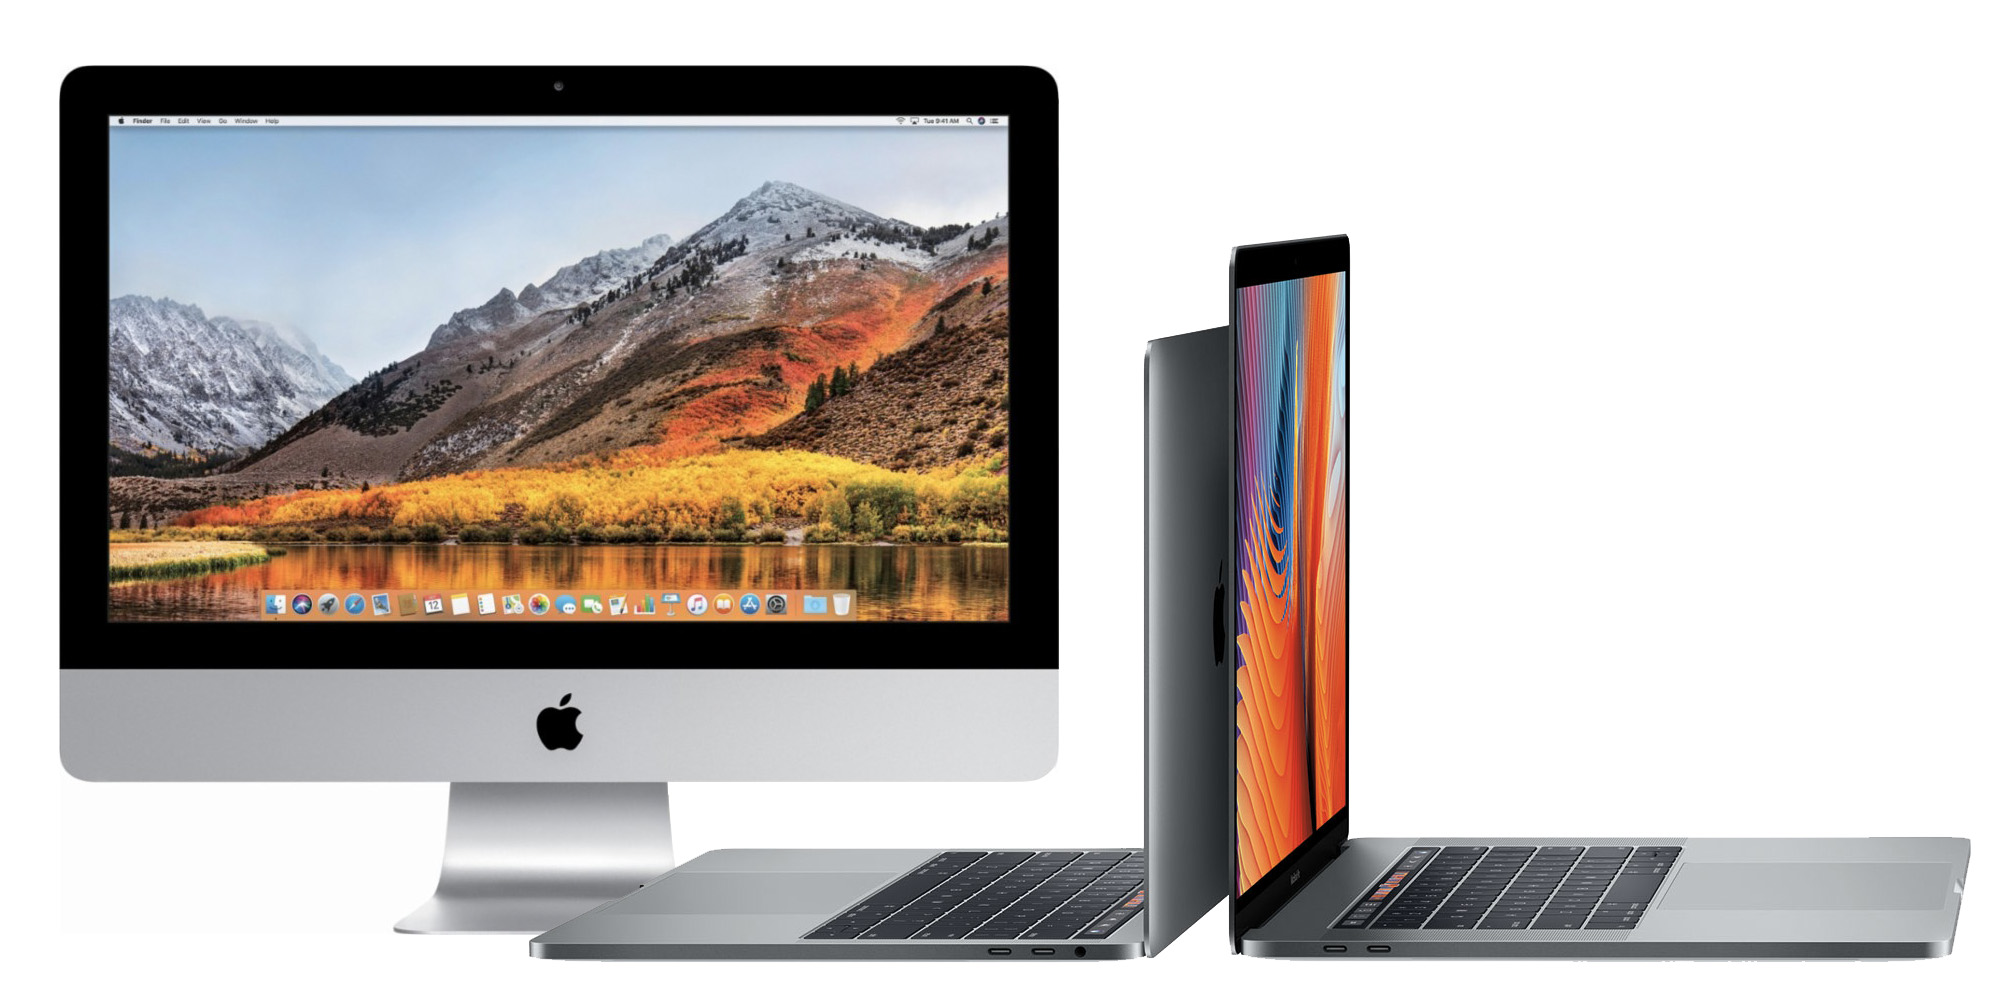 Best Buy's Black Friday iMac and MacBook Pro deals are live w/ up to